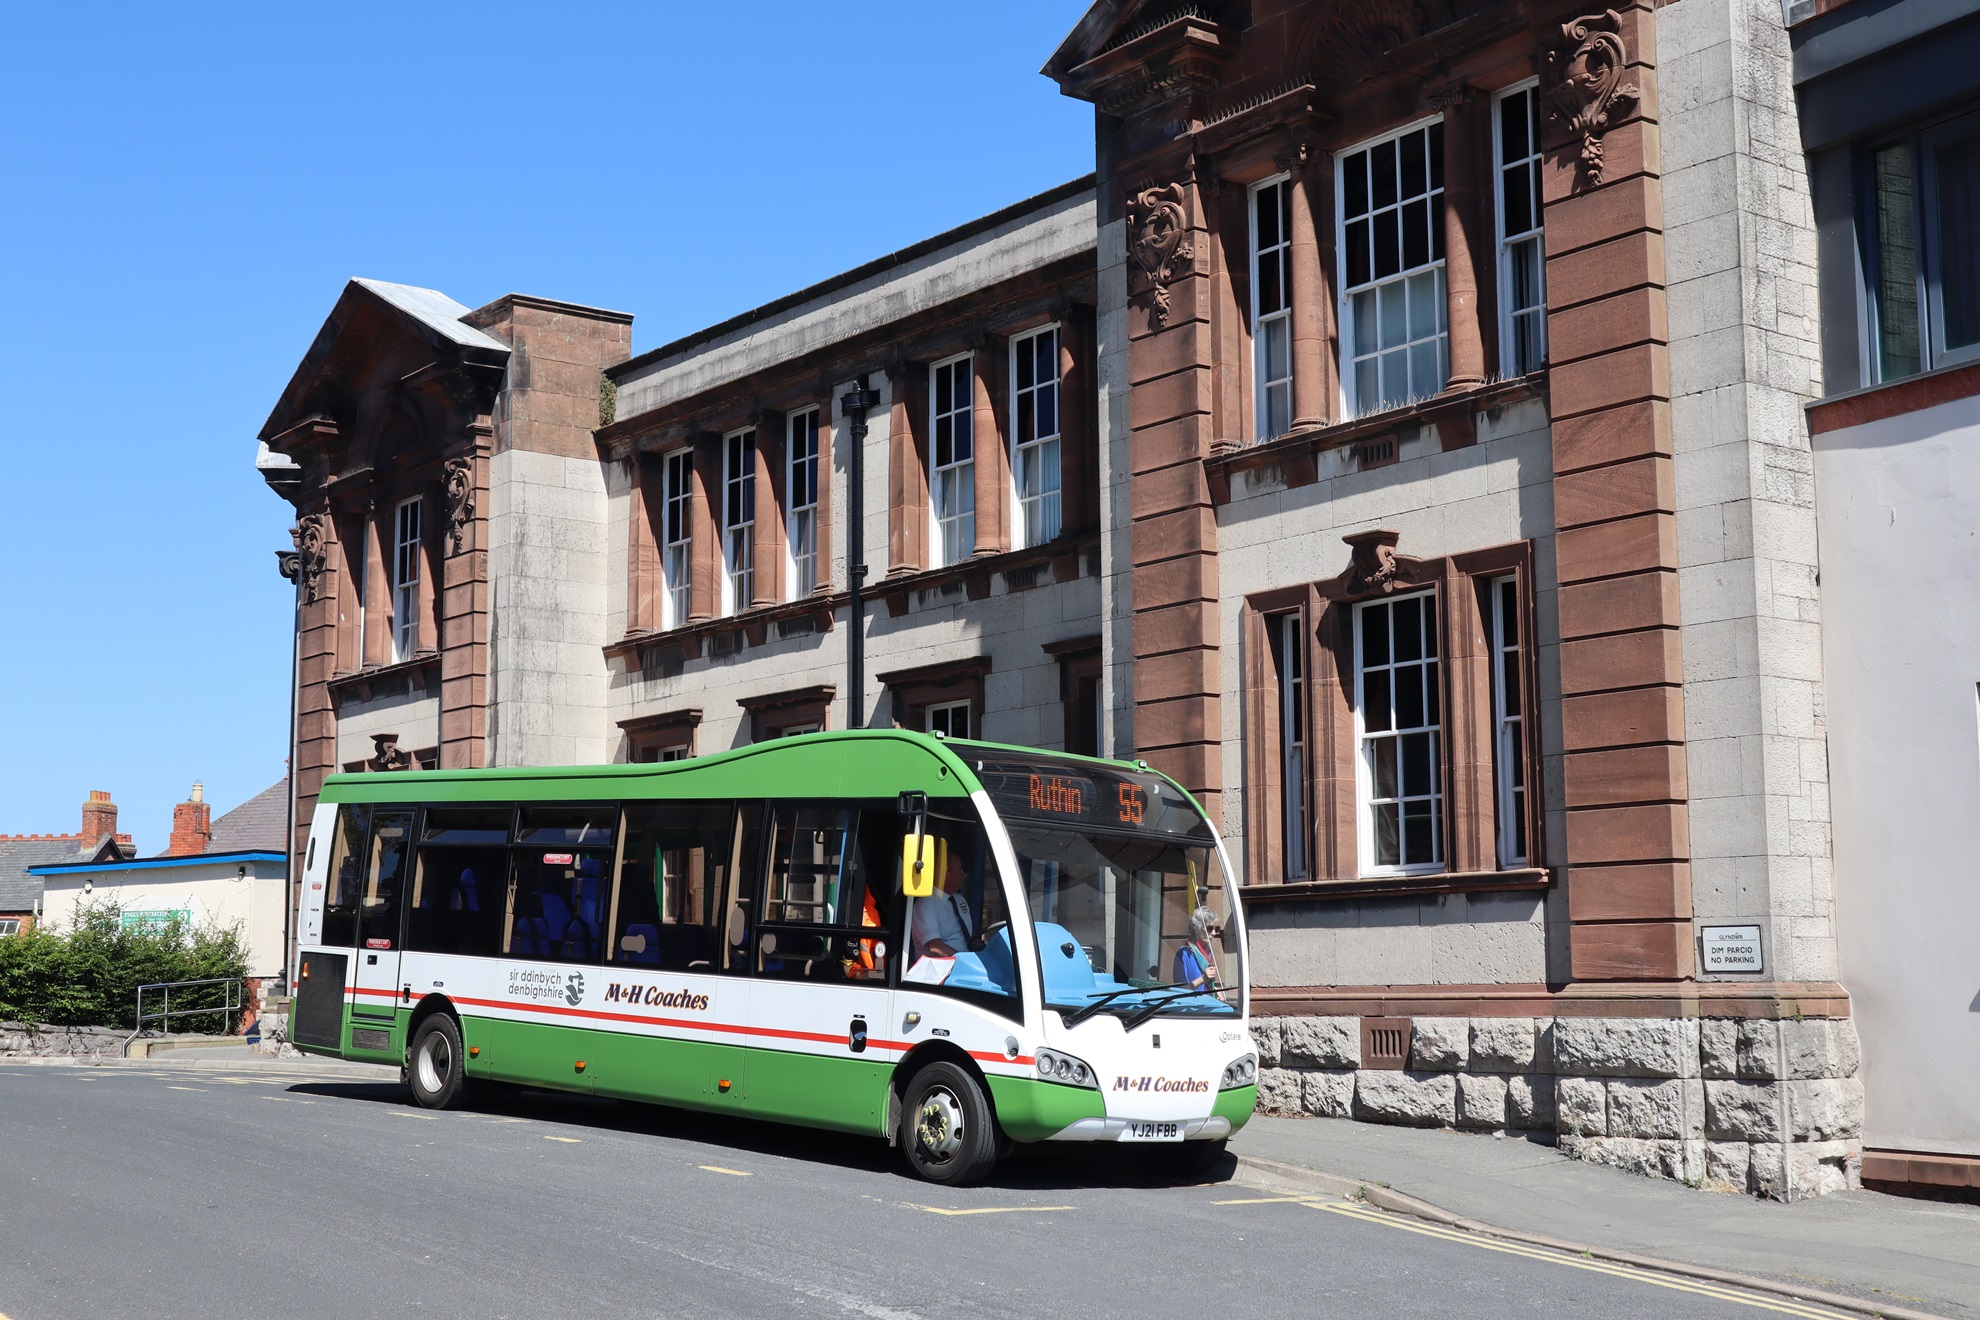 Net cost approach to bus franchising in Wales advocated